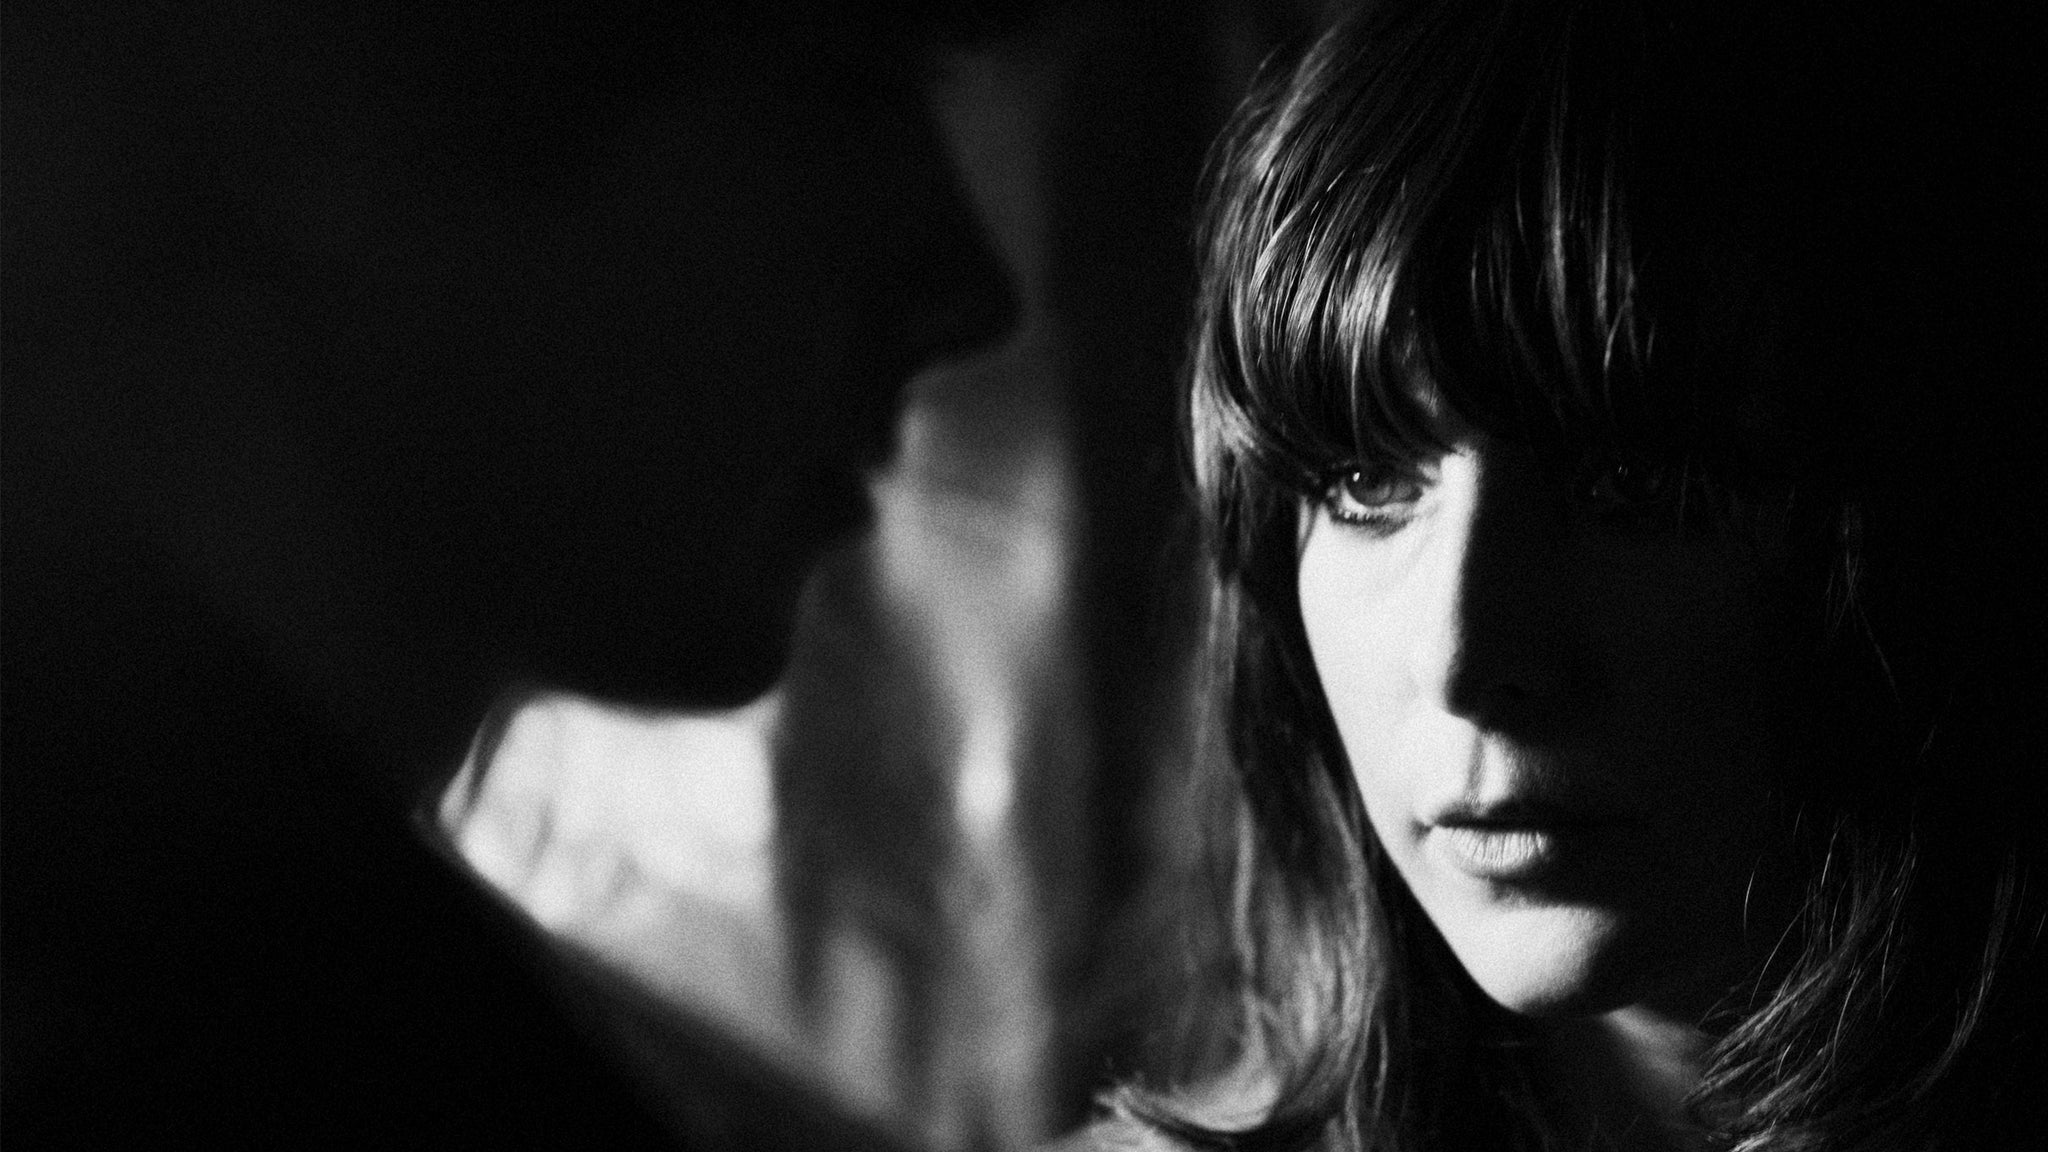 Beach House in Anaheim promo photo for Live Nation presale offer code